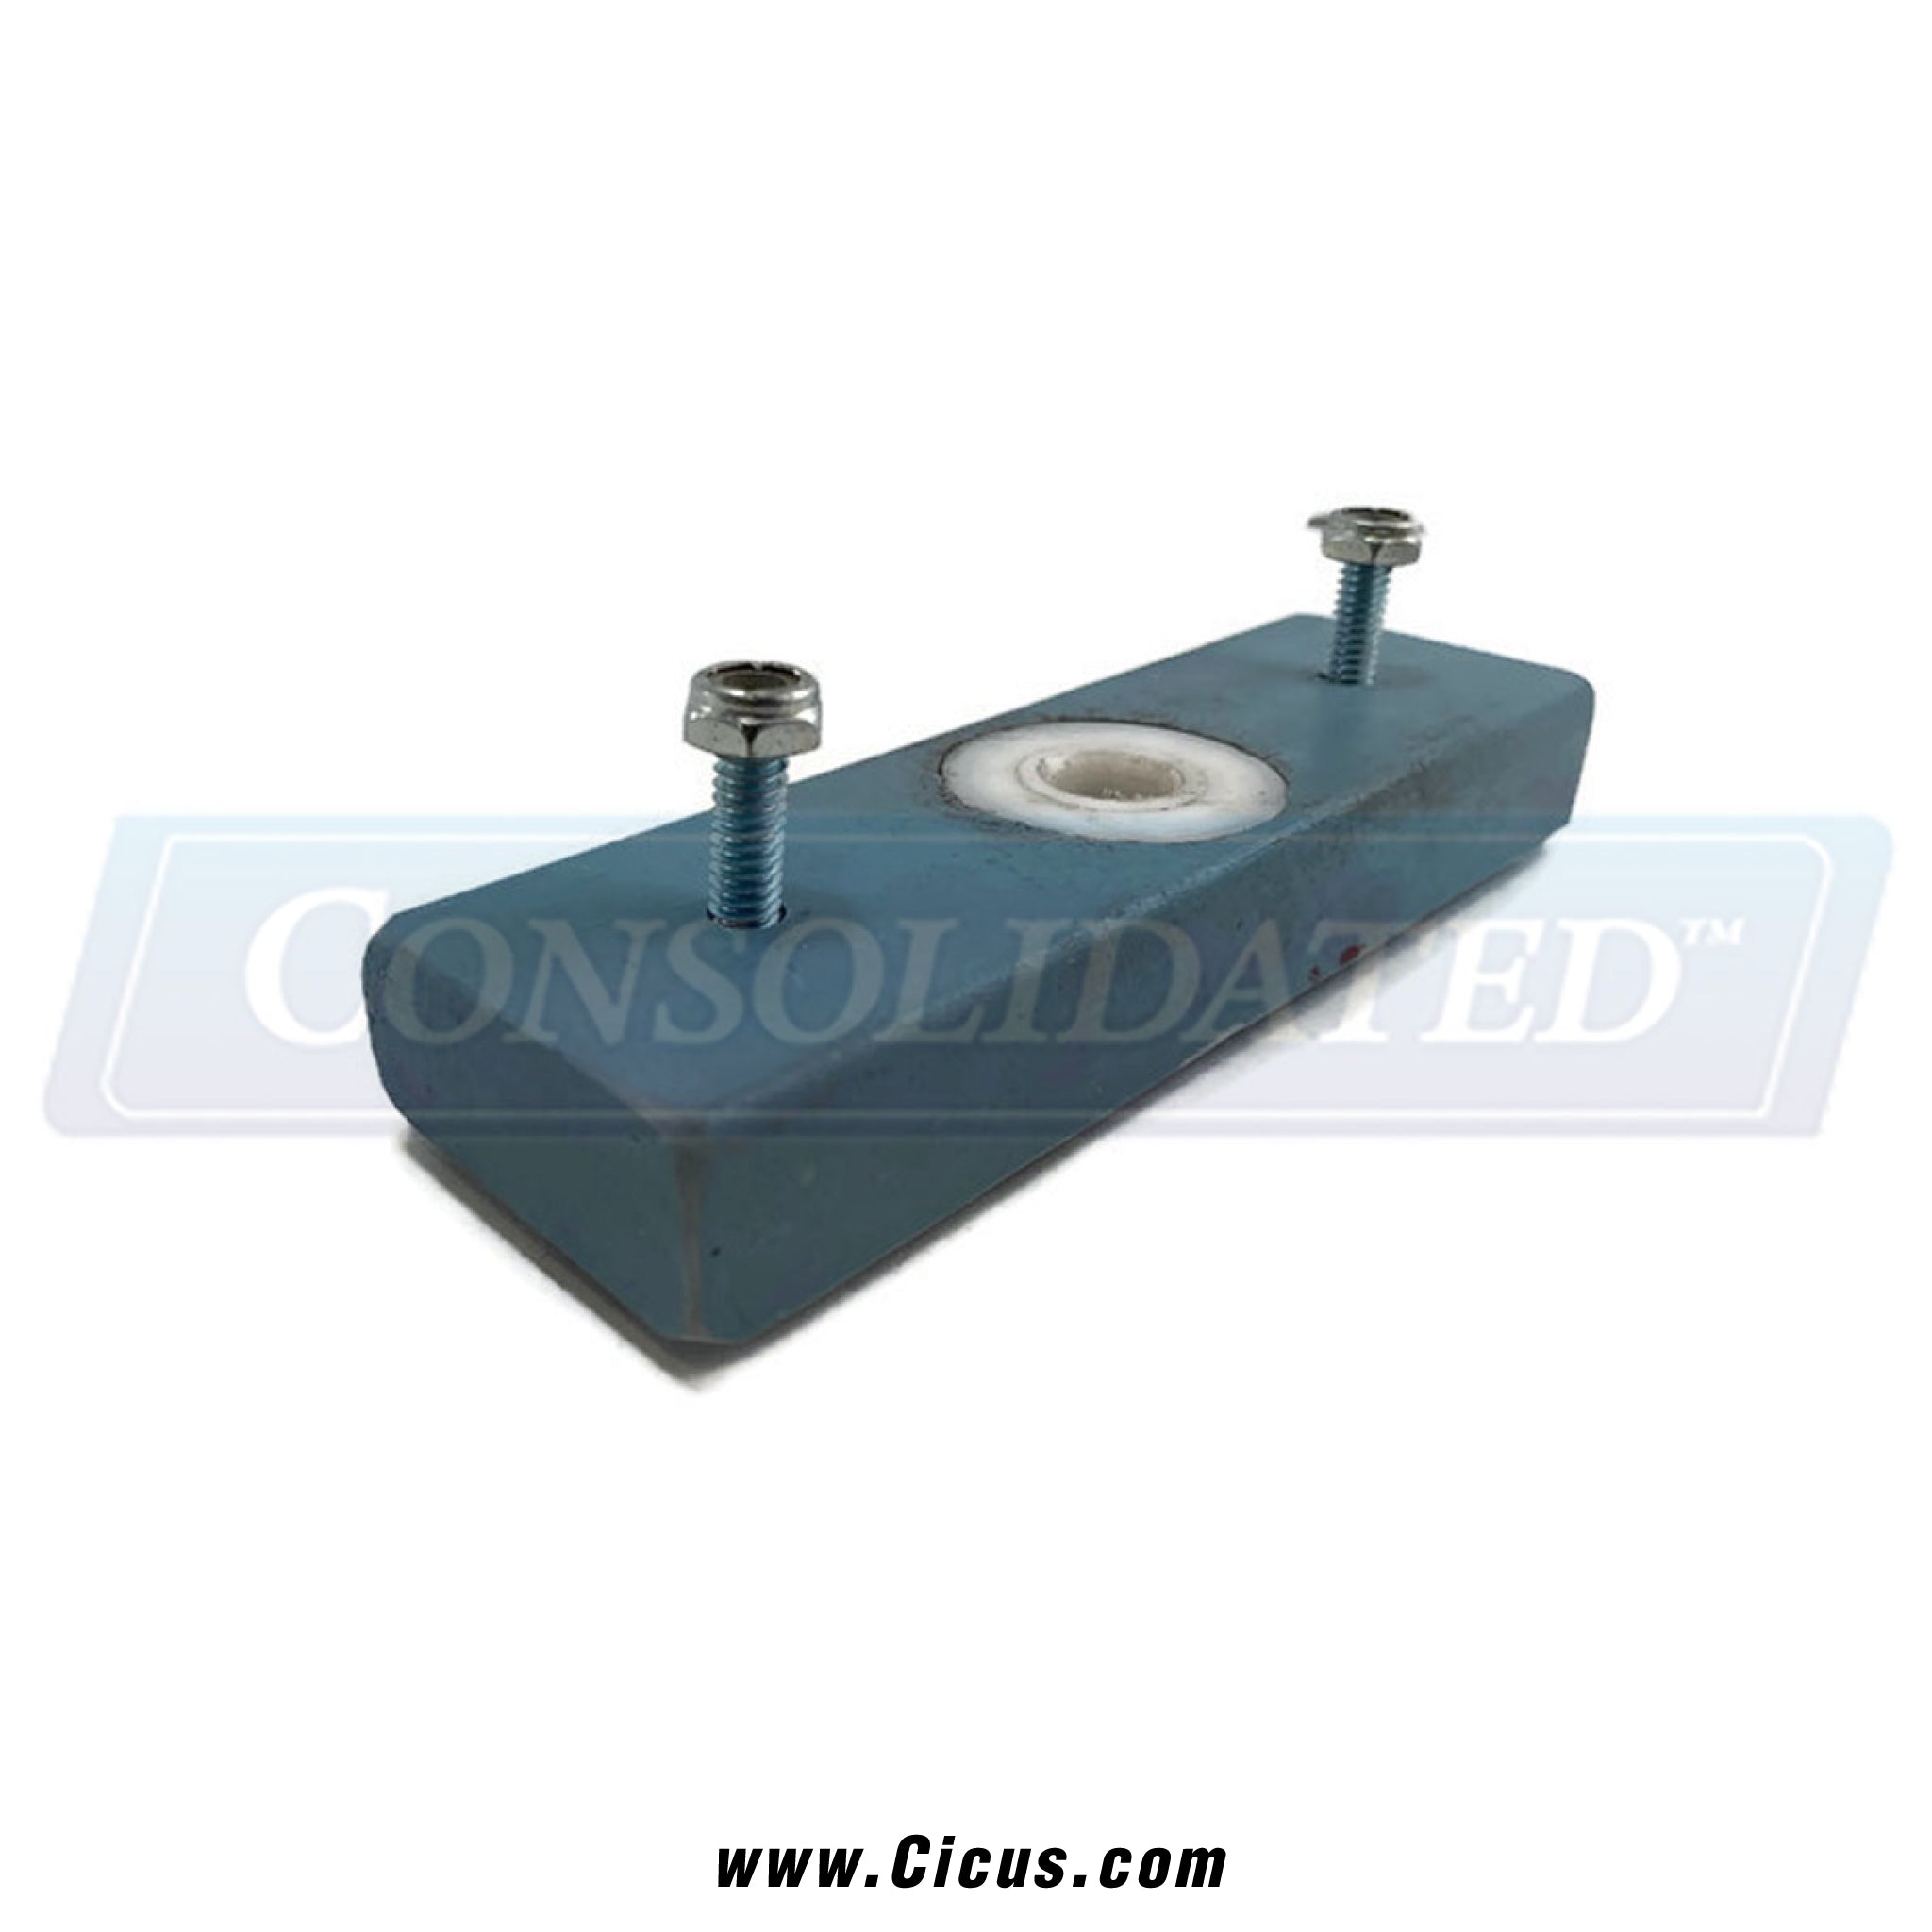 Clean Cycle Systems Lower Bushing Block Assembly [500-04-L]